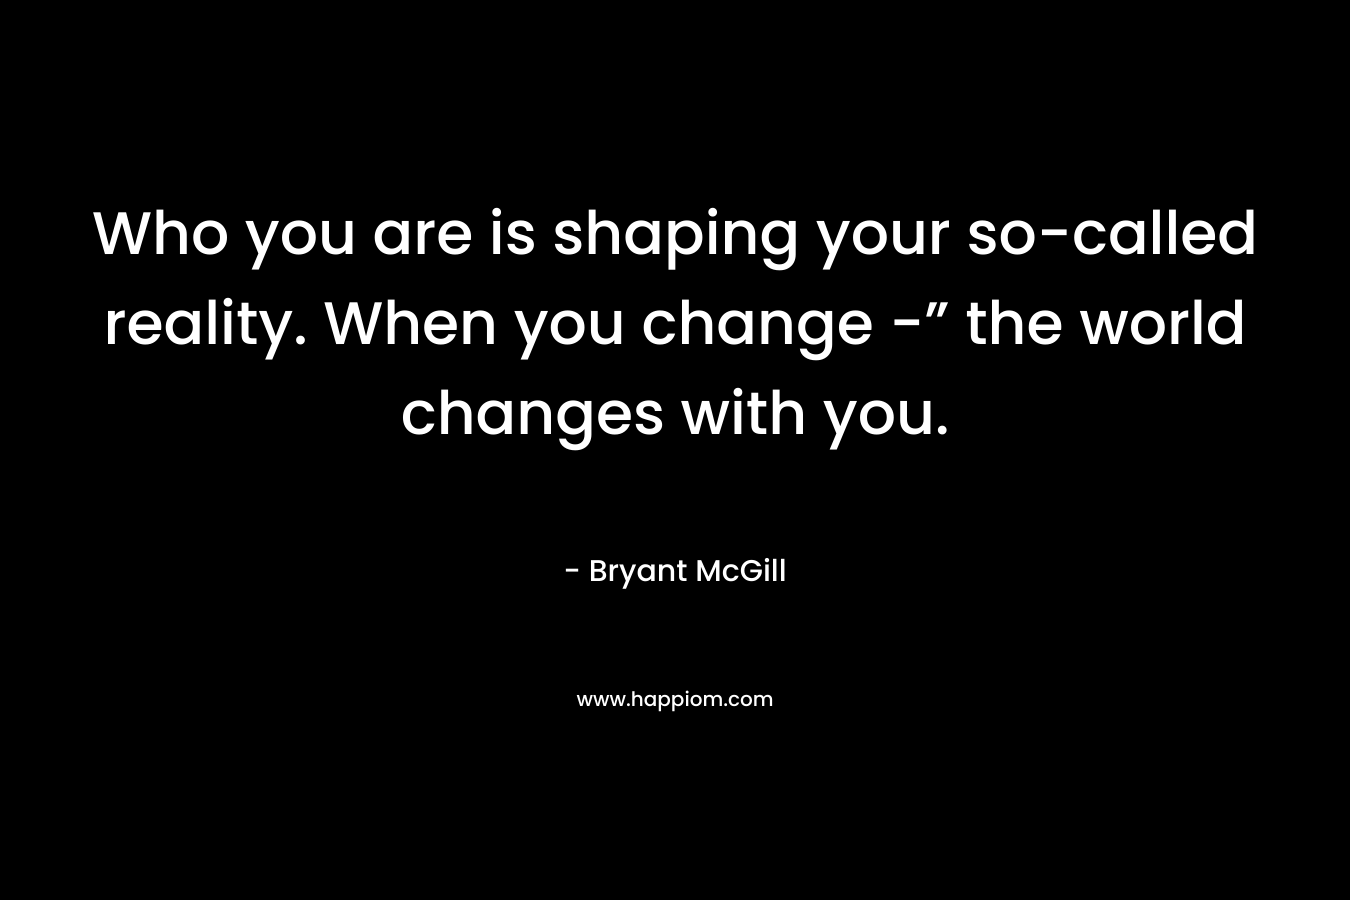 Who you are is shaping your so-called reality. When you change -” the world changes with you.